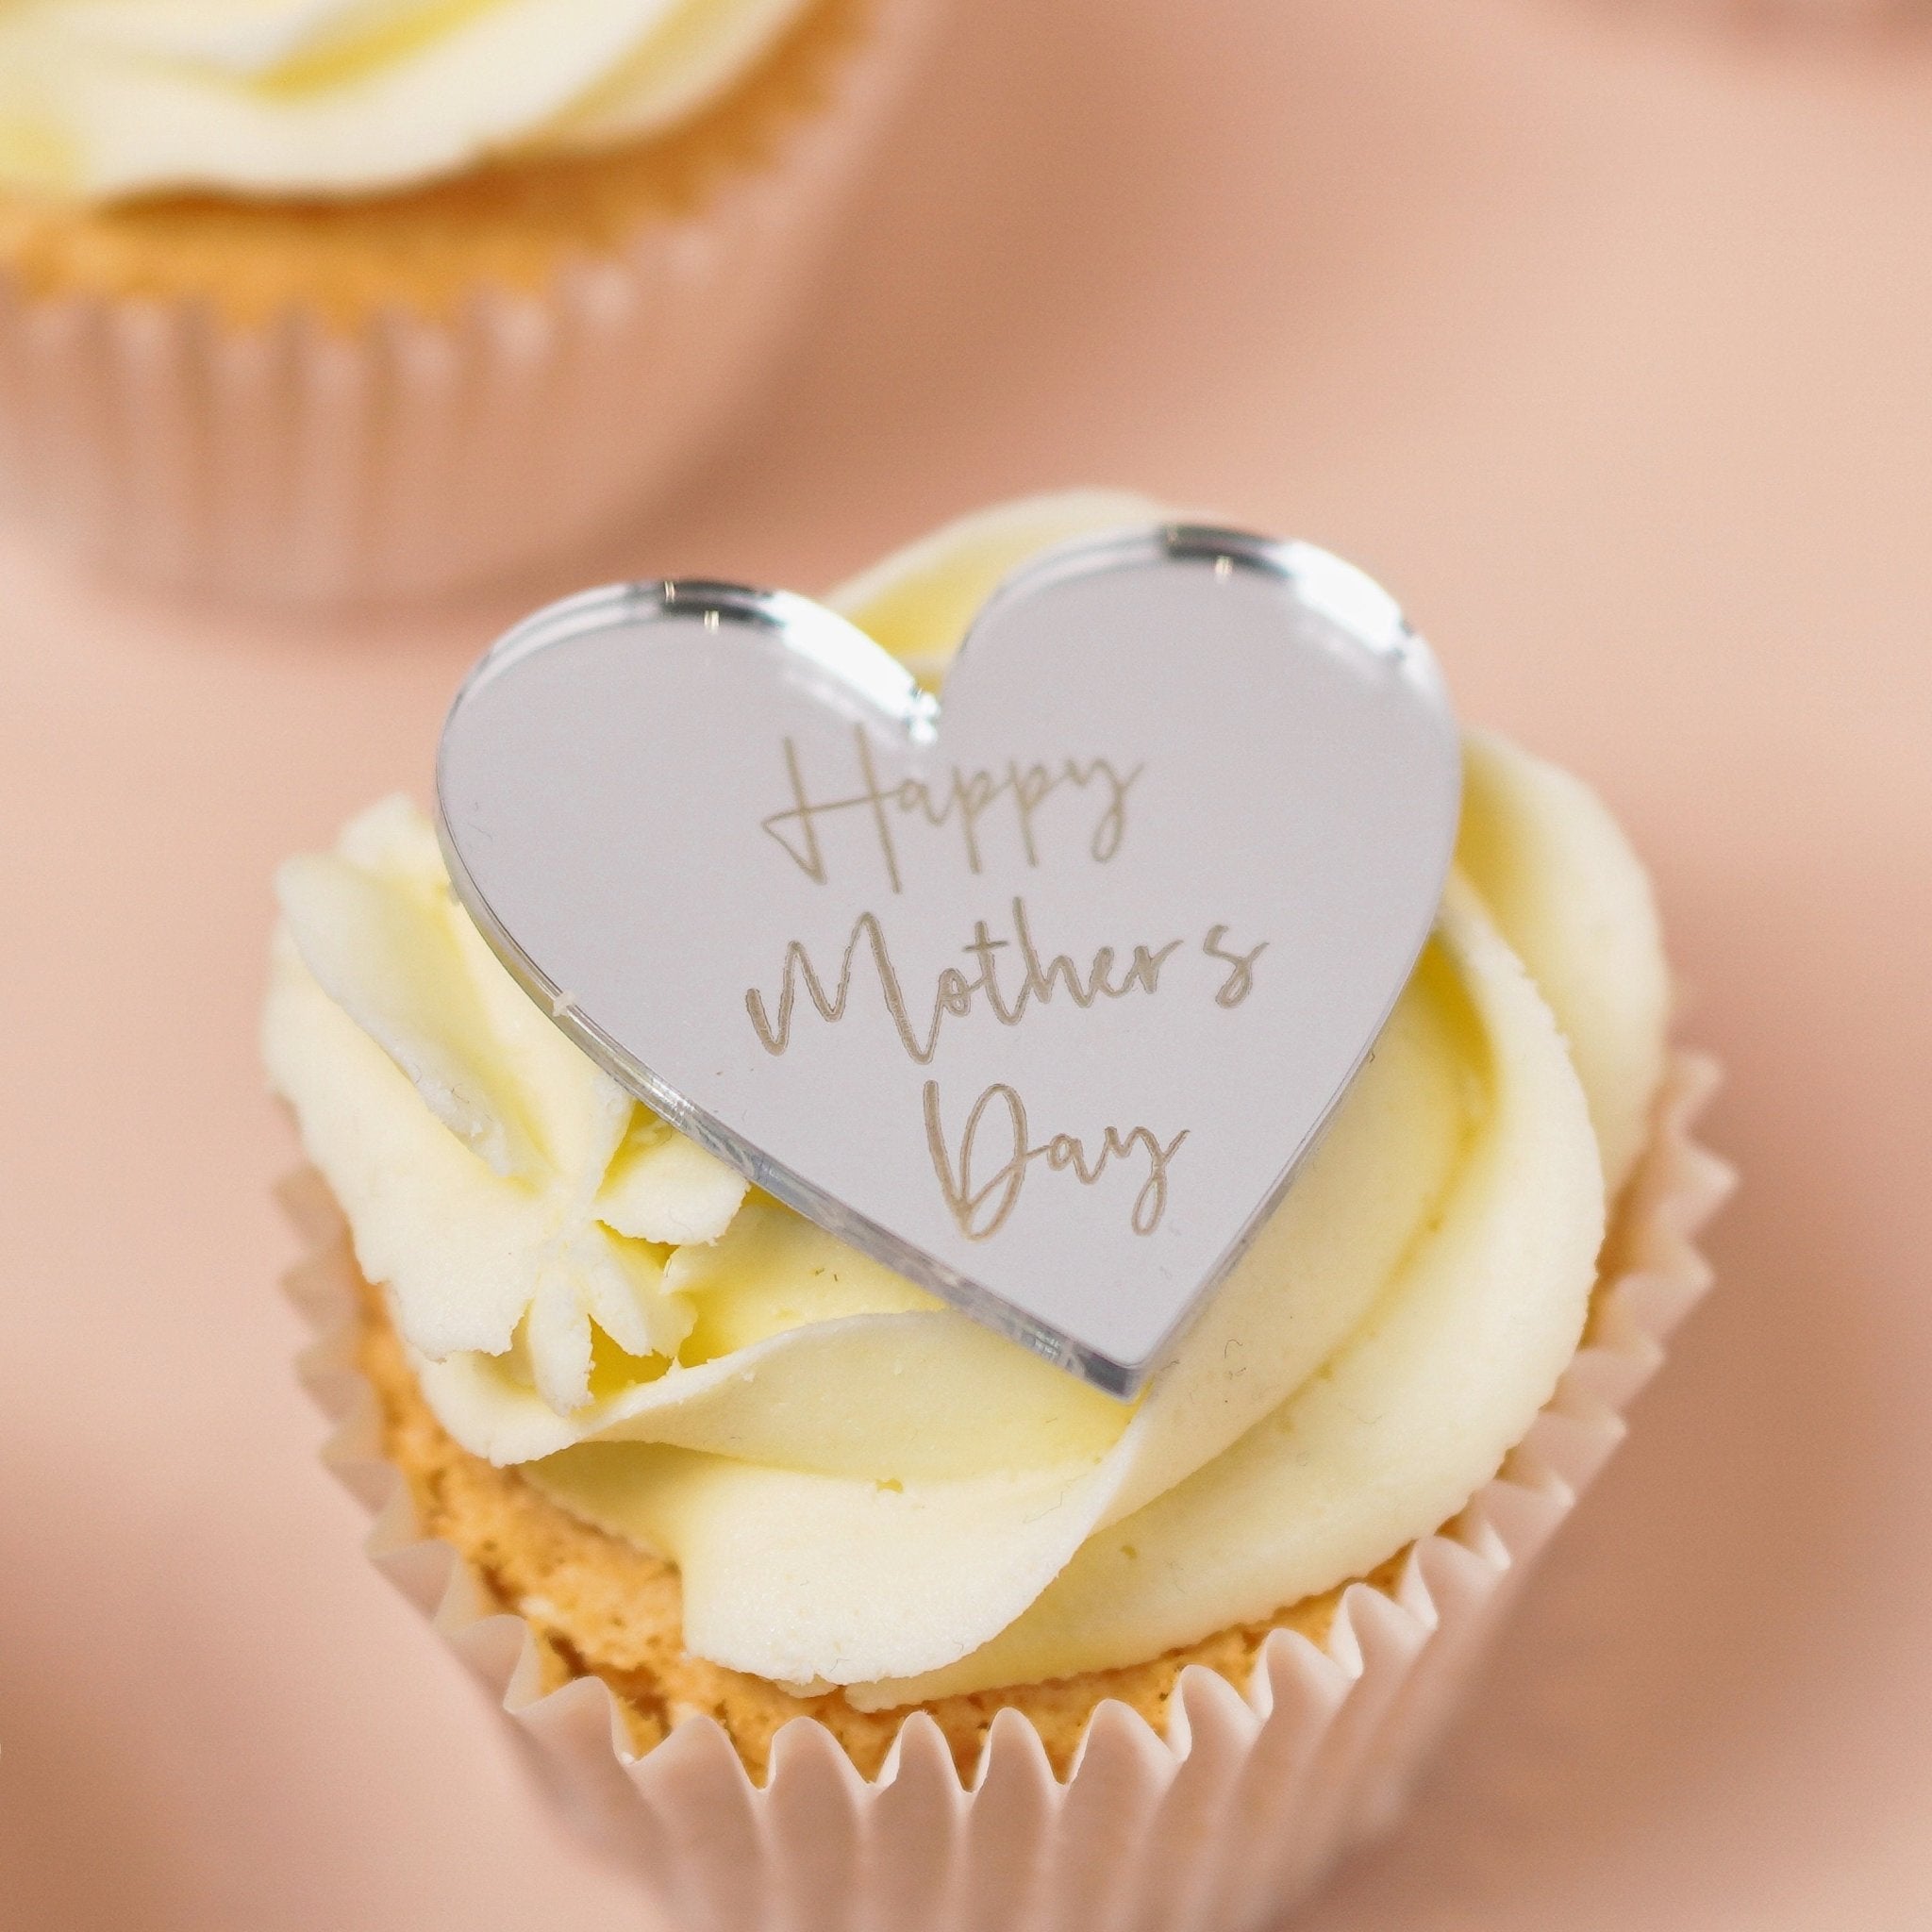 Happy Mothers Day Cake topper